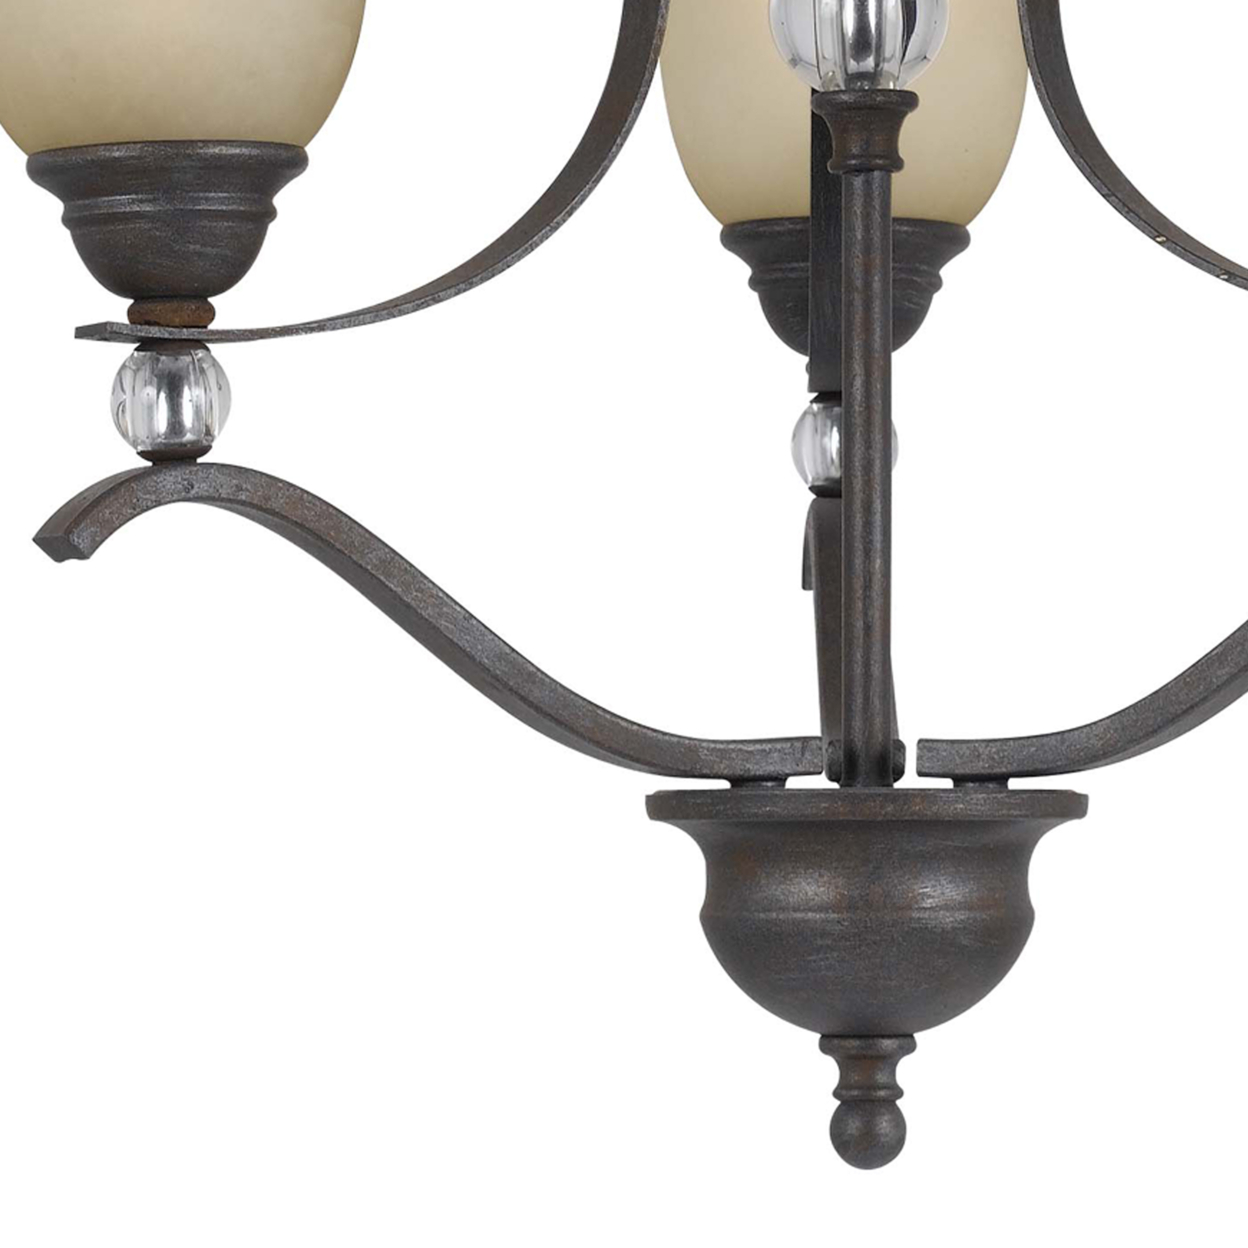 3 Bulb Uplight Chandelier With Metal Frame And Glass Shades, Gray And Bronze- Saltoro Sherpi